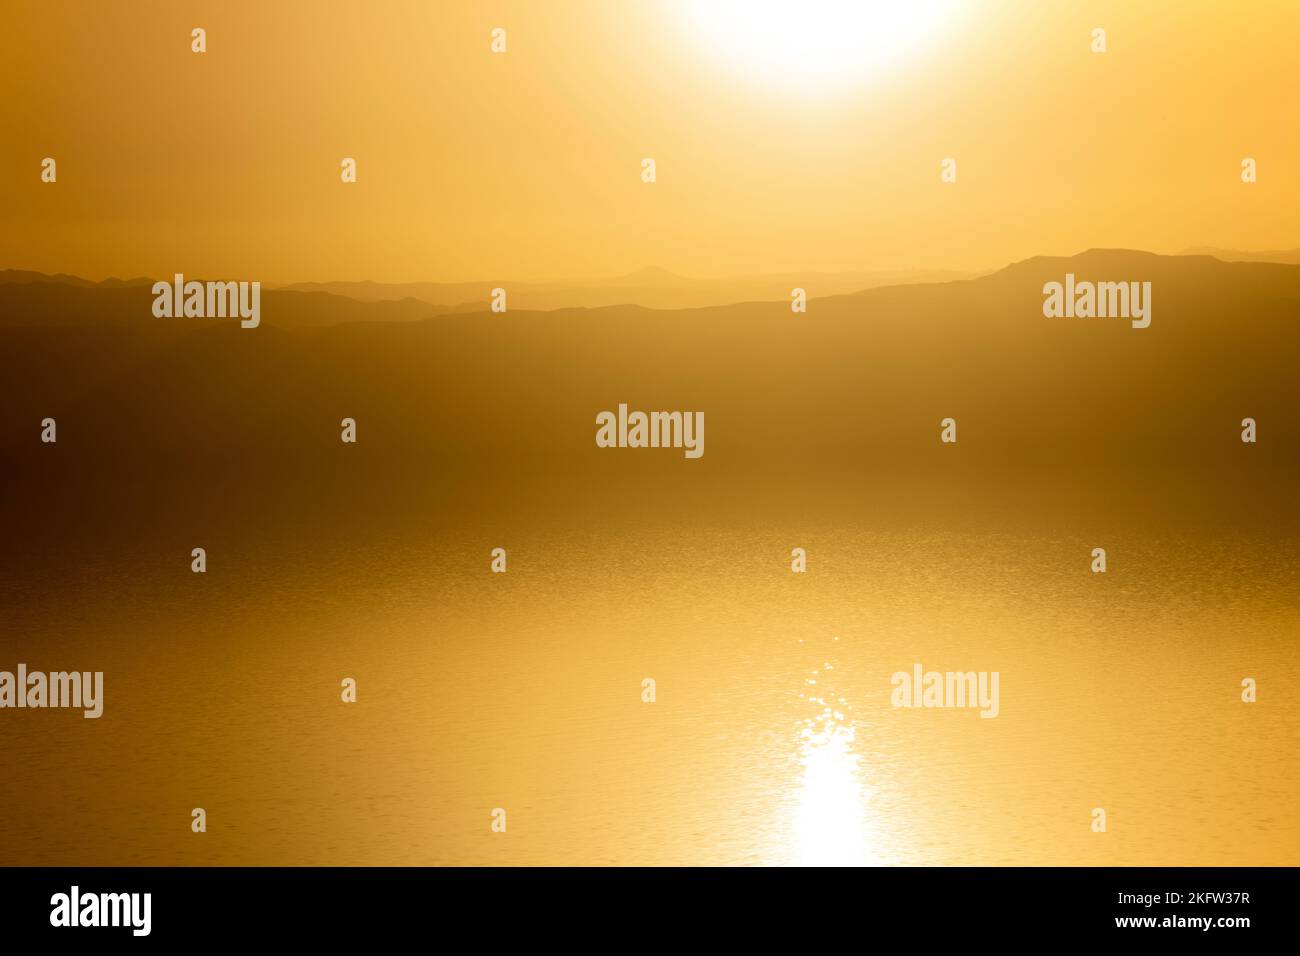 Amazing gold color in the landscape during the sunset or sunrise Stock Photo